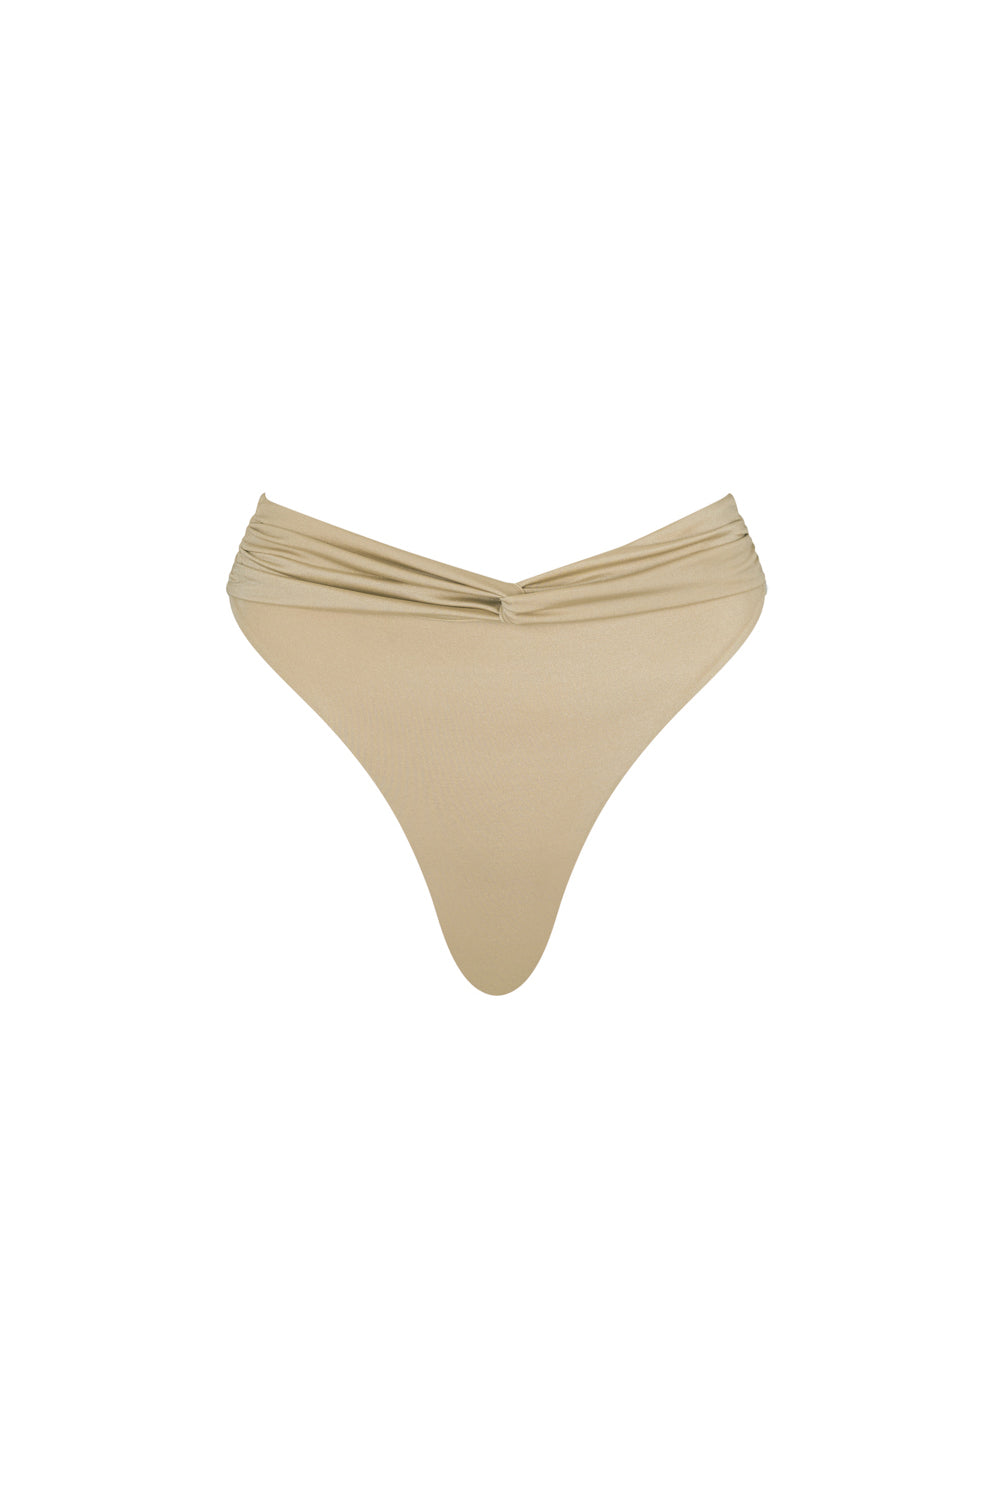 flook the label analia brief swimwear gold product image front